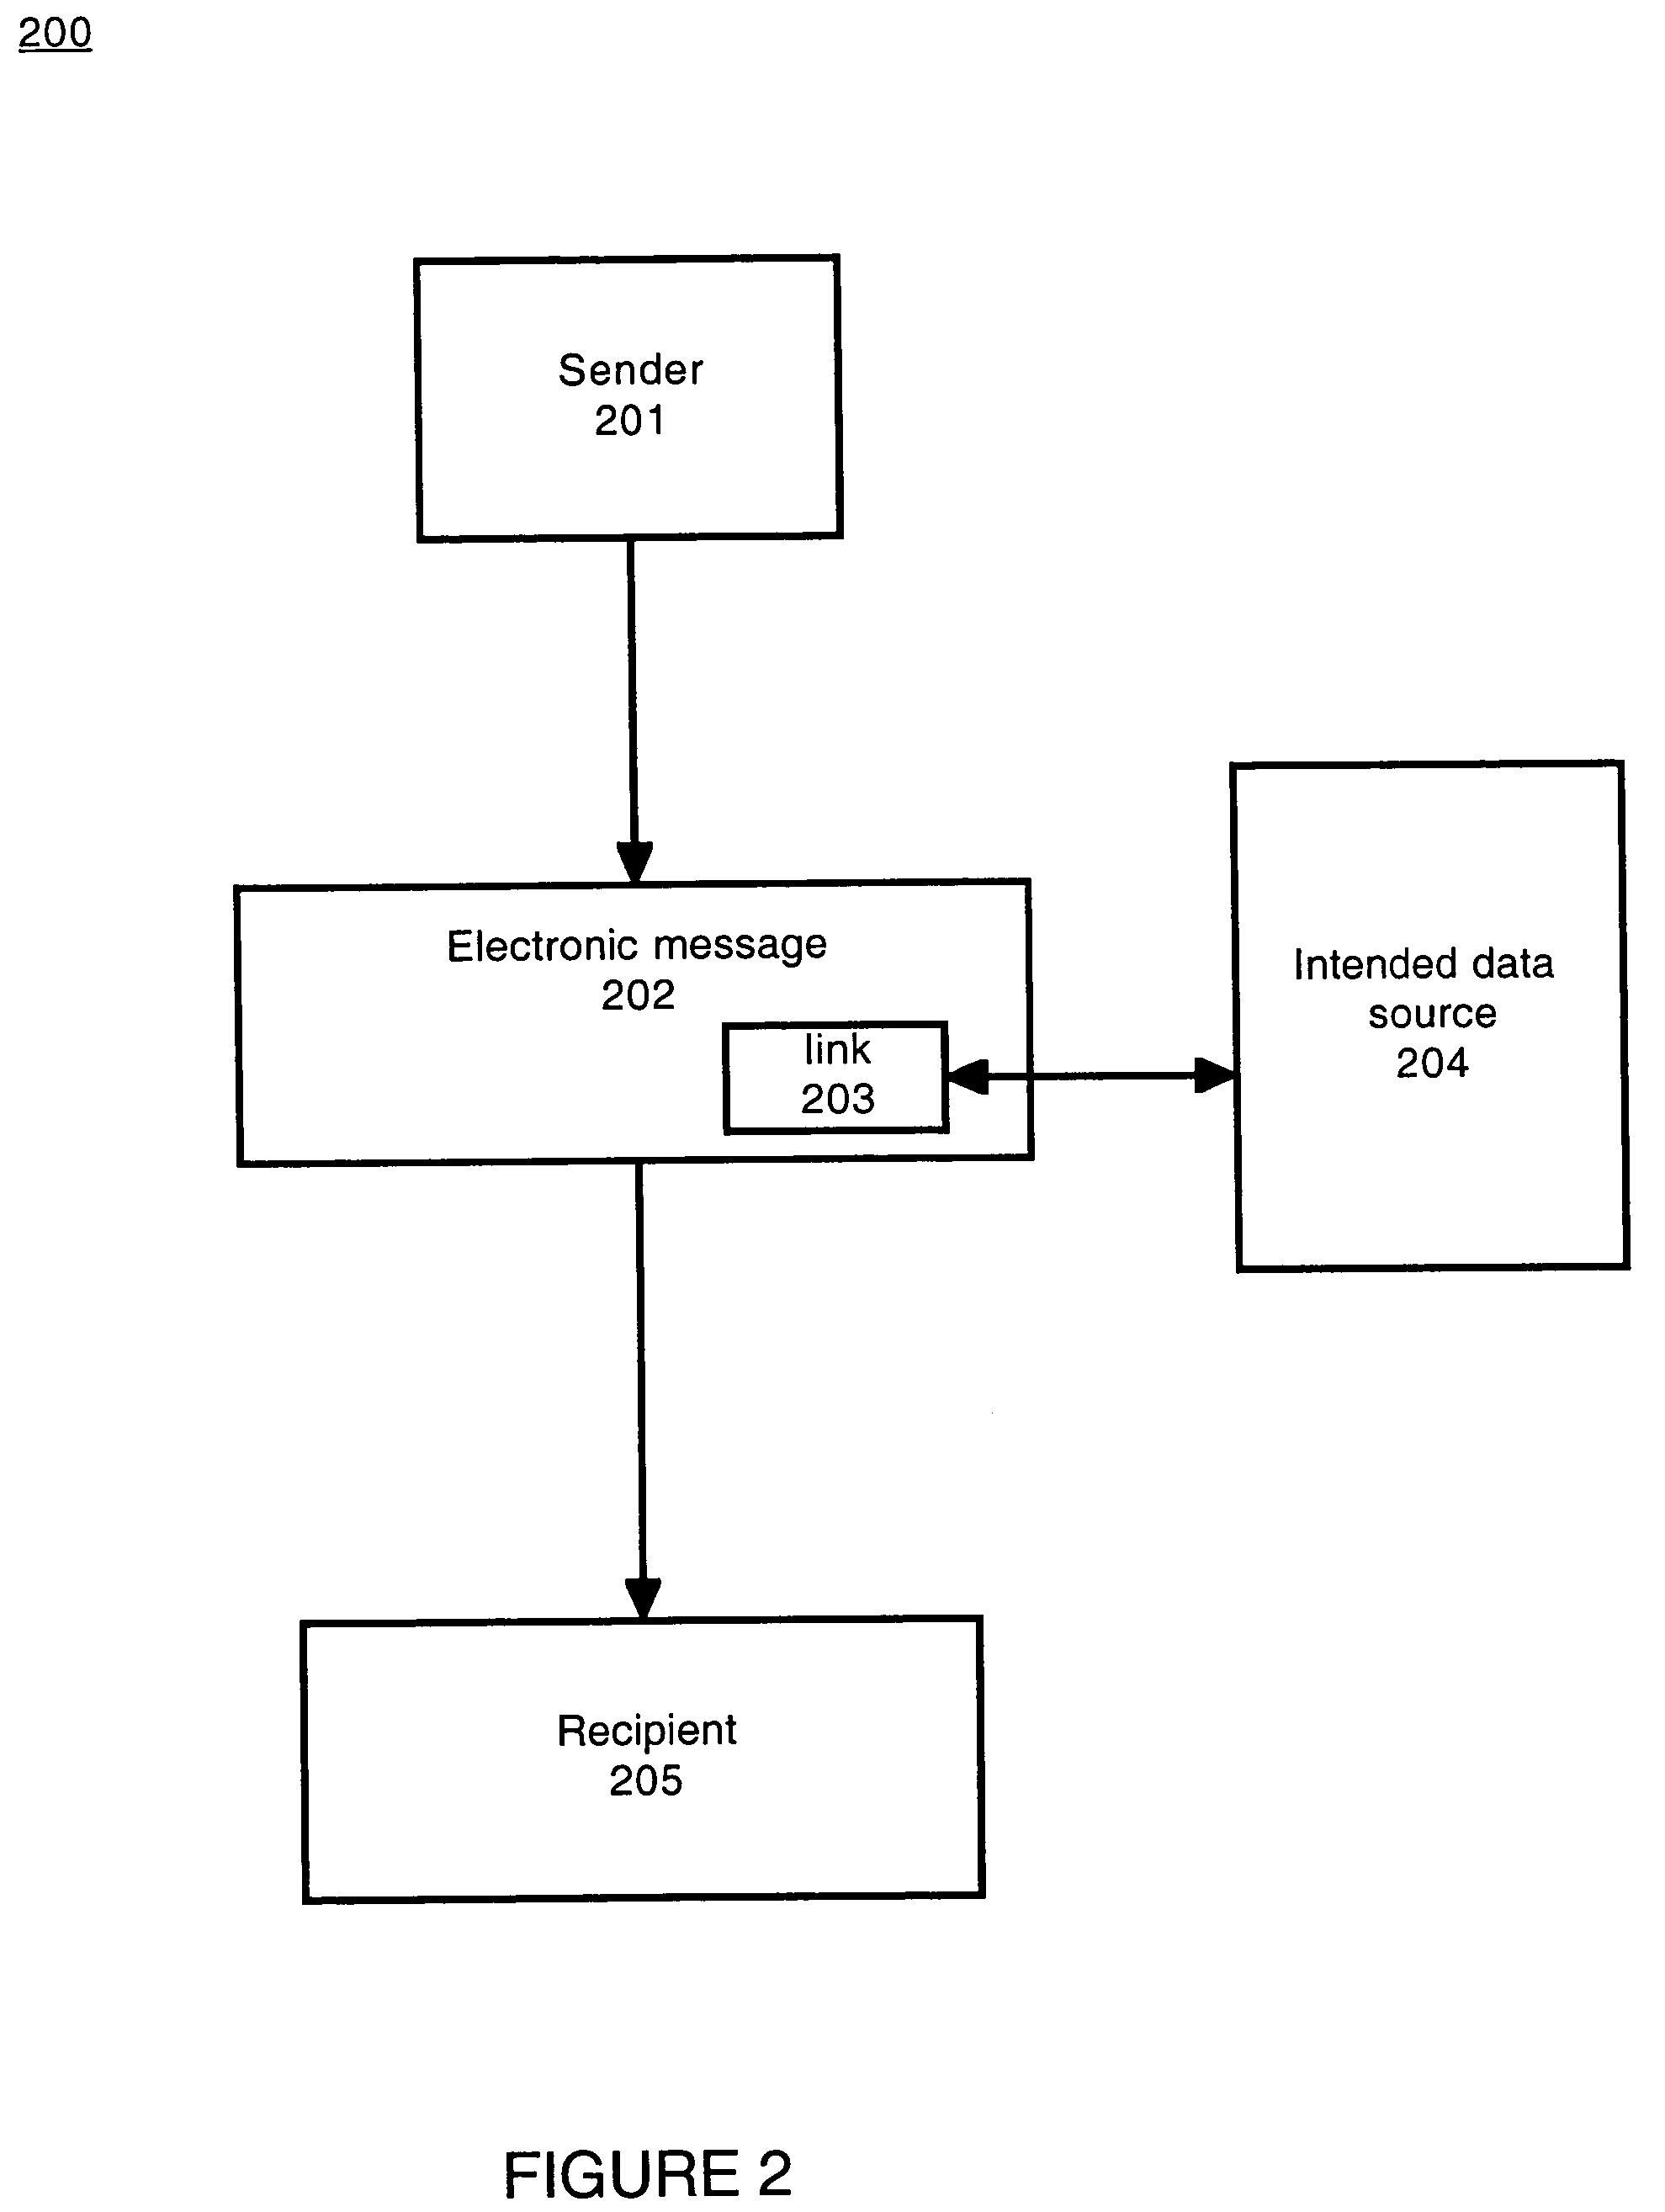 System and method for verifying intended contents of an electronic message